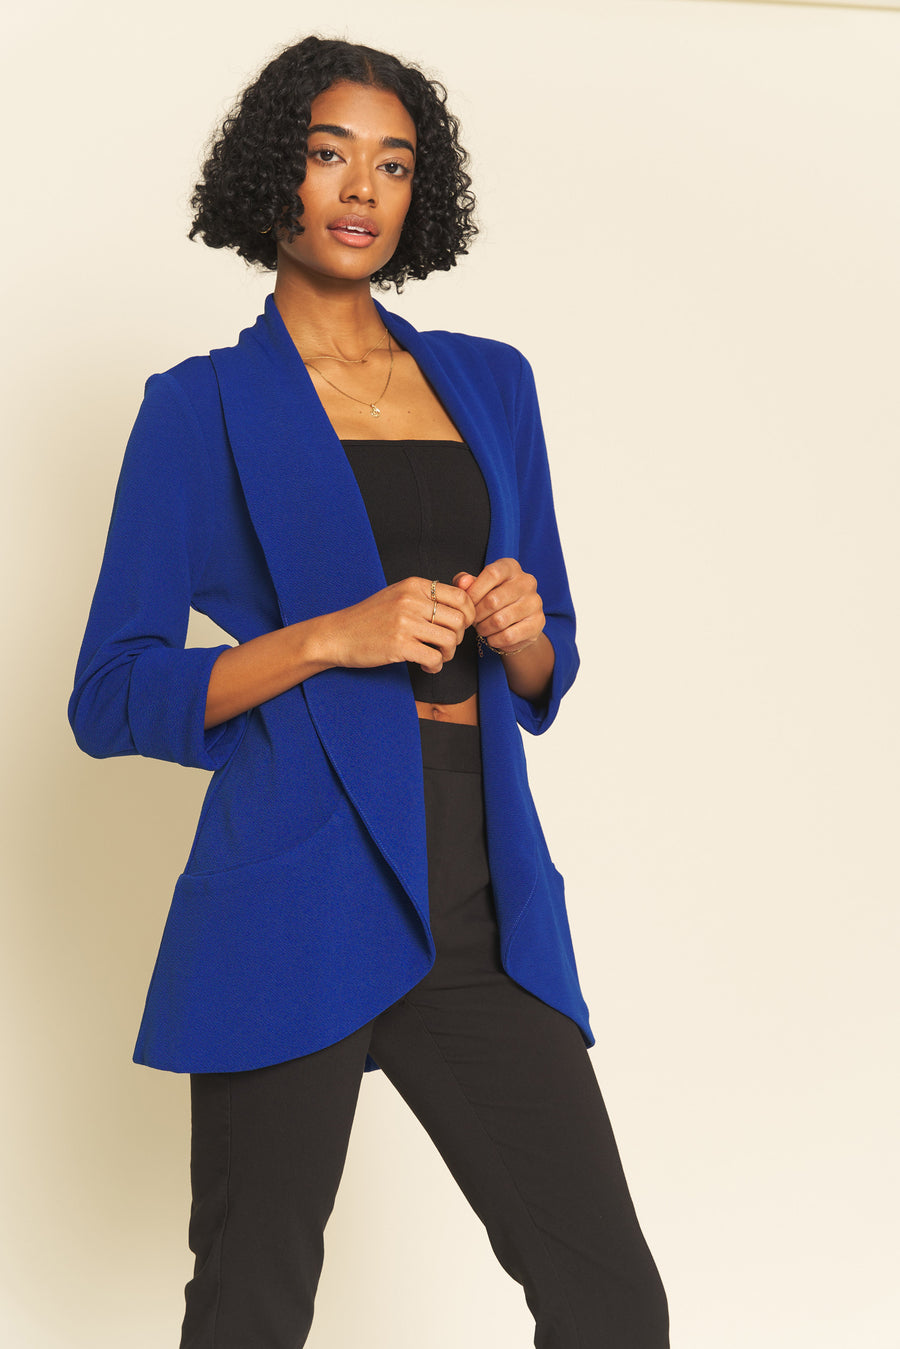 No Srcipt image - Images of 1 of 6 Lightweight Summer Fabric Classic Melanie Shawl Simple Staple Bright Royal Blue Color Workwear Blazer Jacket Everyday Shawl Front Pockets Office Wear Best Seller Customer Favorite